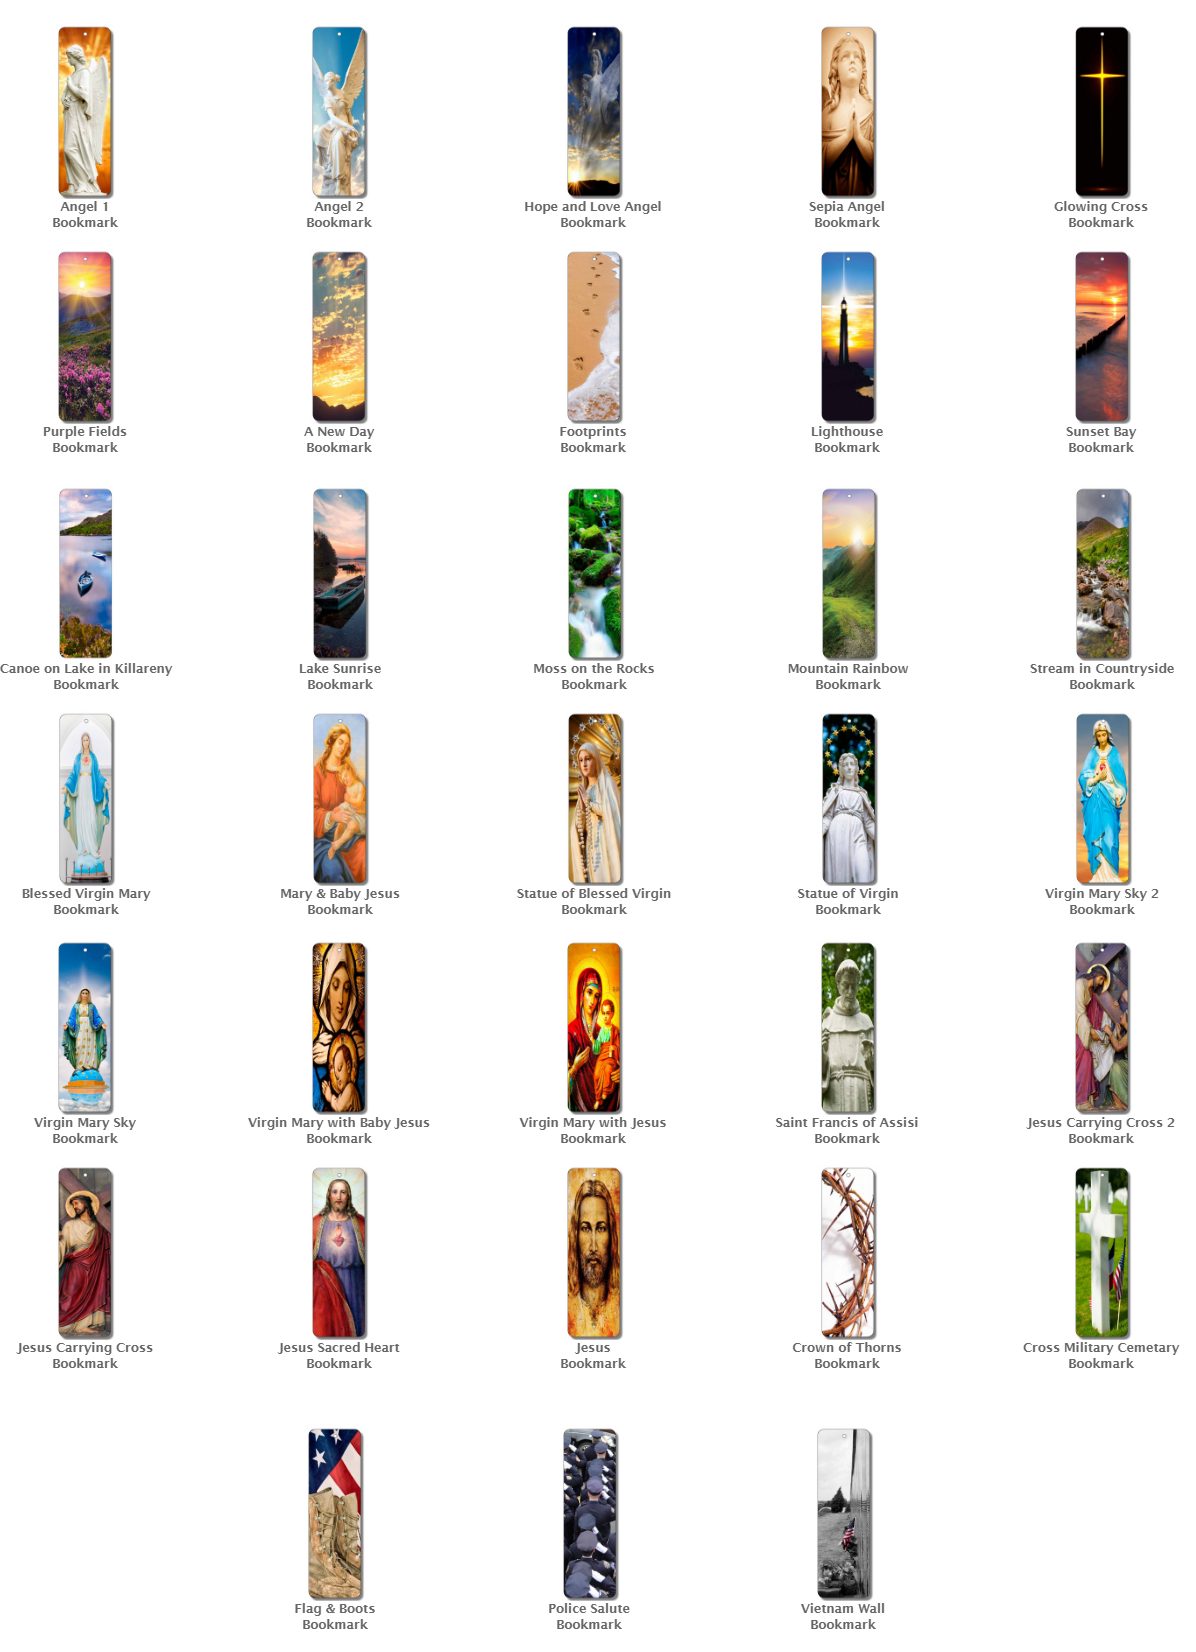 Funeral Prints Bookmarks